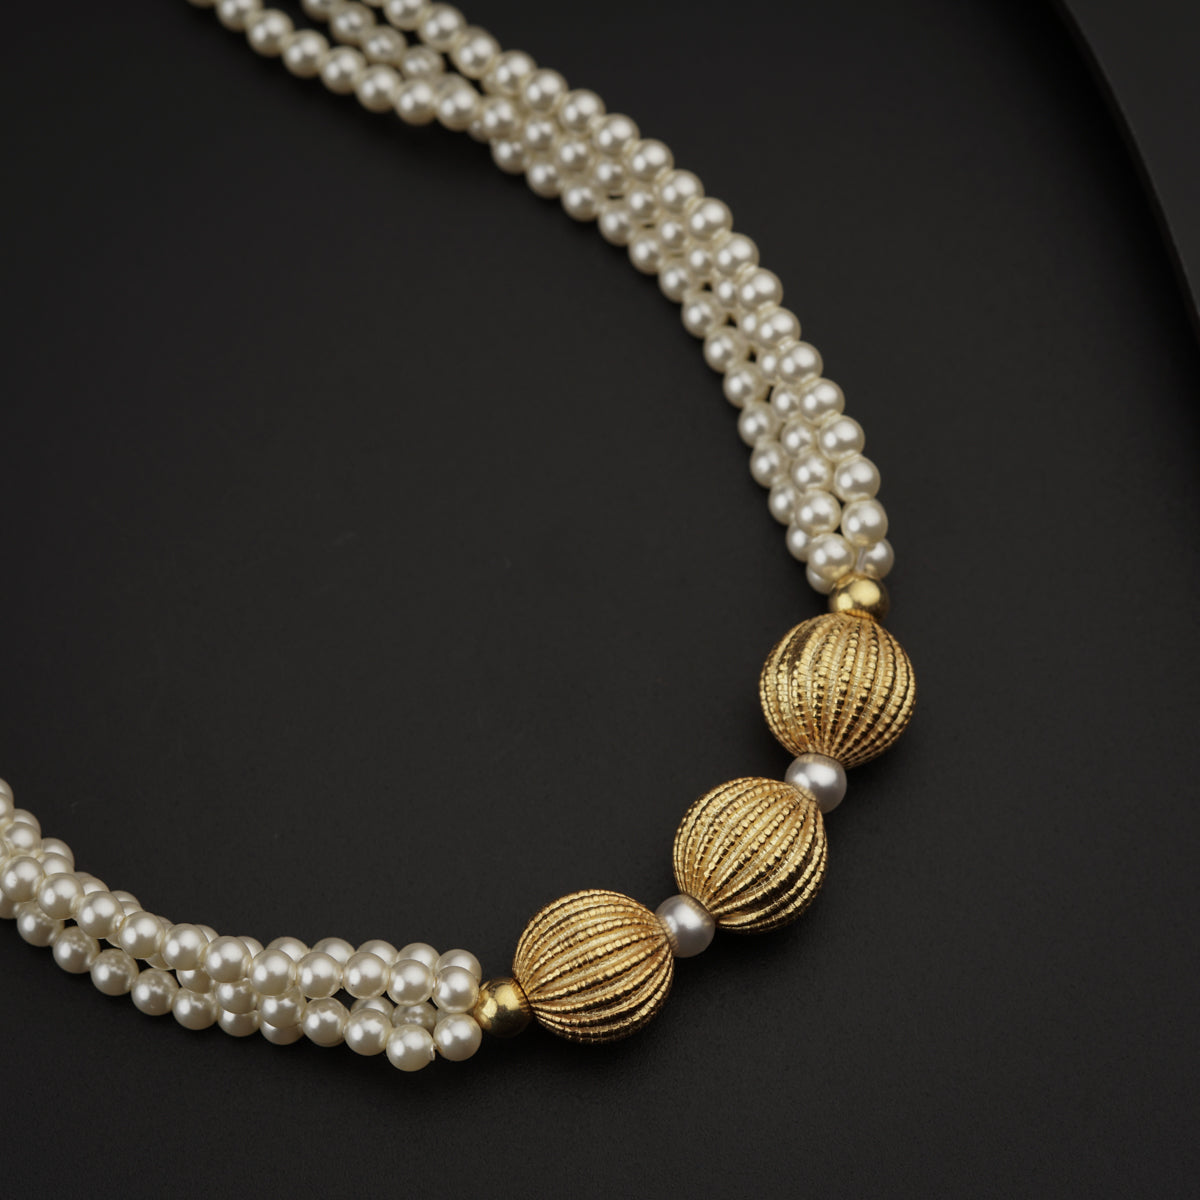 Silver Beads Motif Necklace with Pearls Gold Plated